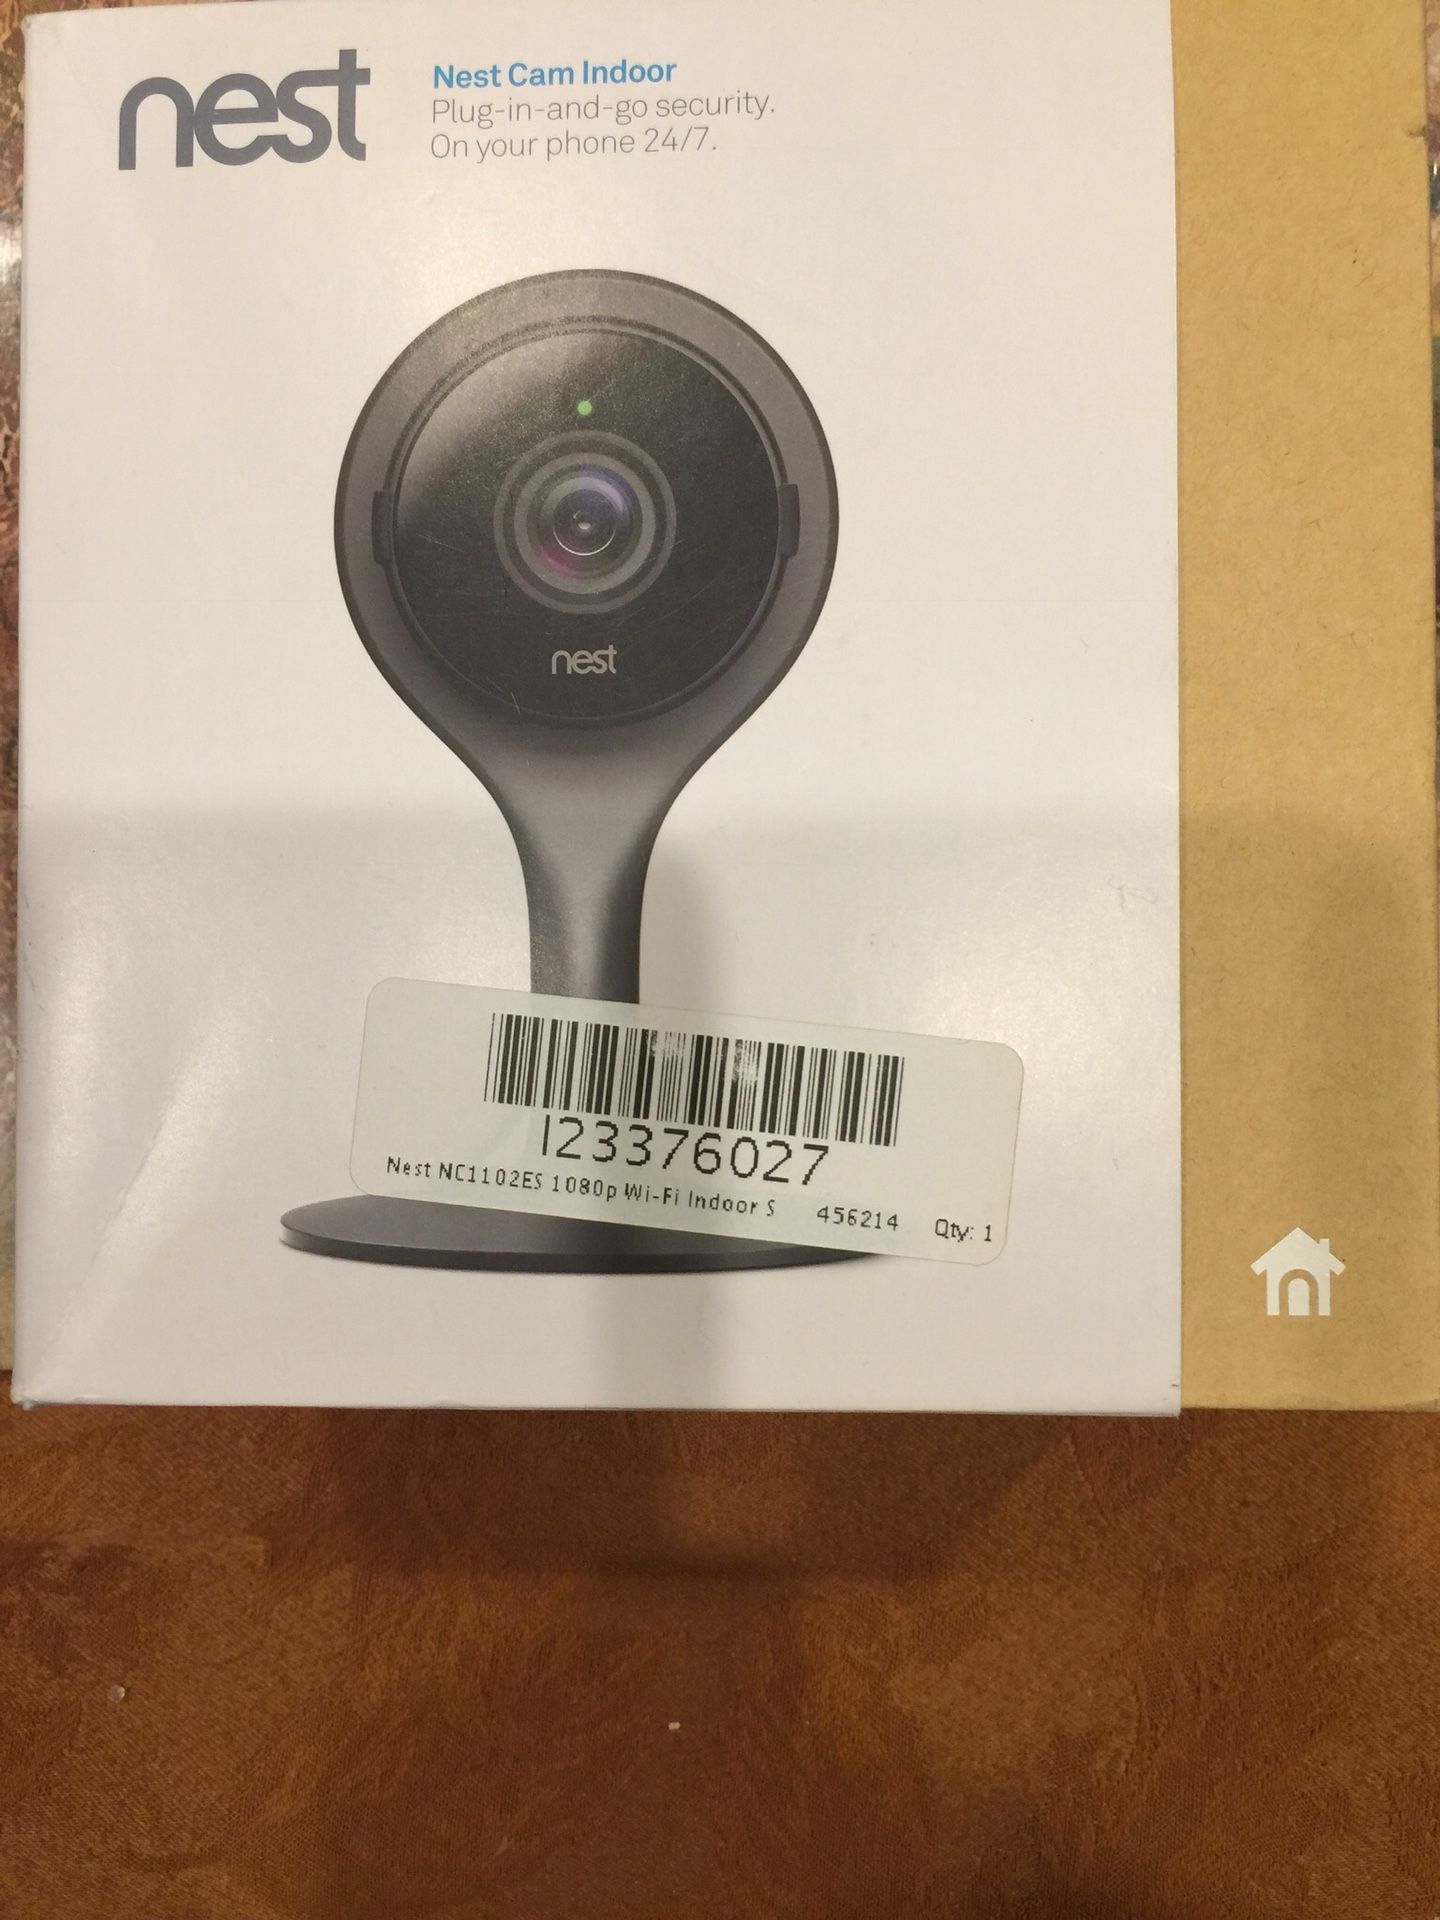 NEST NC1102ES 1080p Wi-Fi Indoor Security Camera for Home, Baby, Pets, Business - New